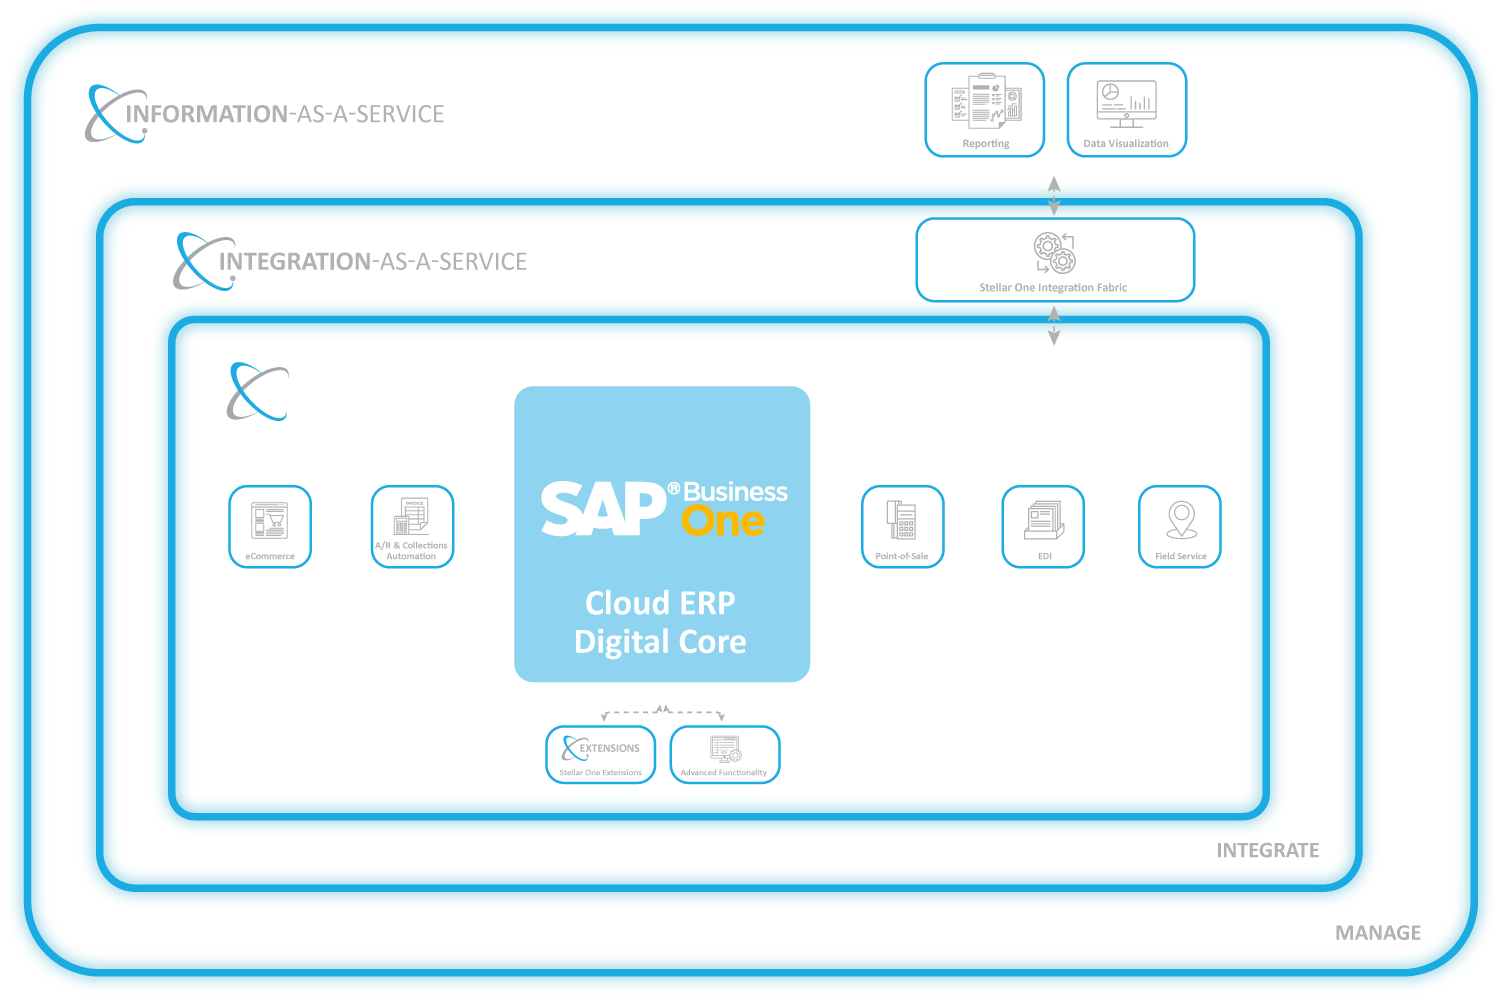 SAP Business One Cloud ERP Software is the Digital Core of the Stellar One CLoud Platform